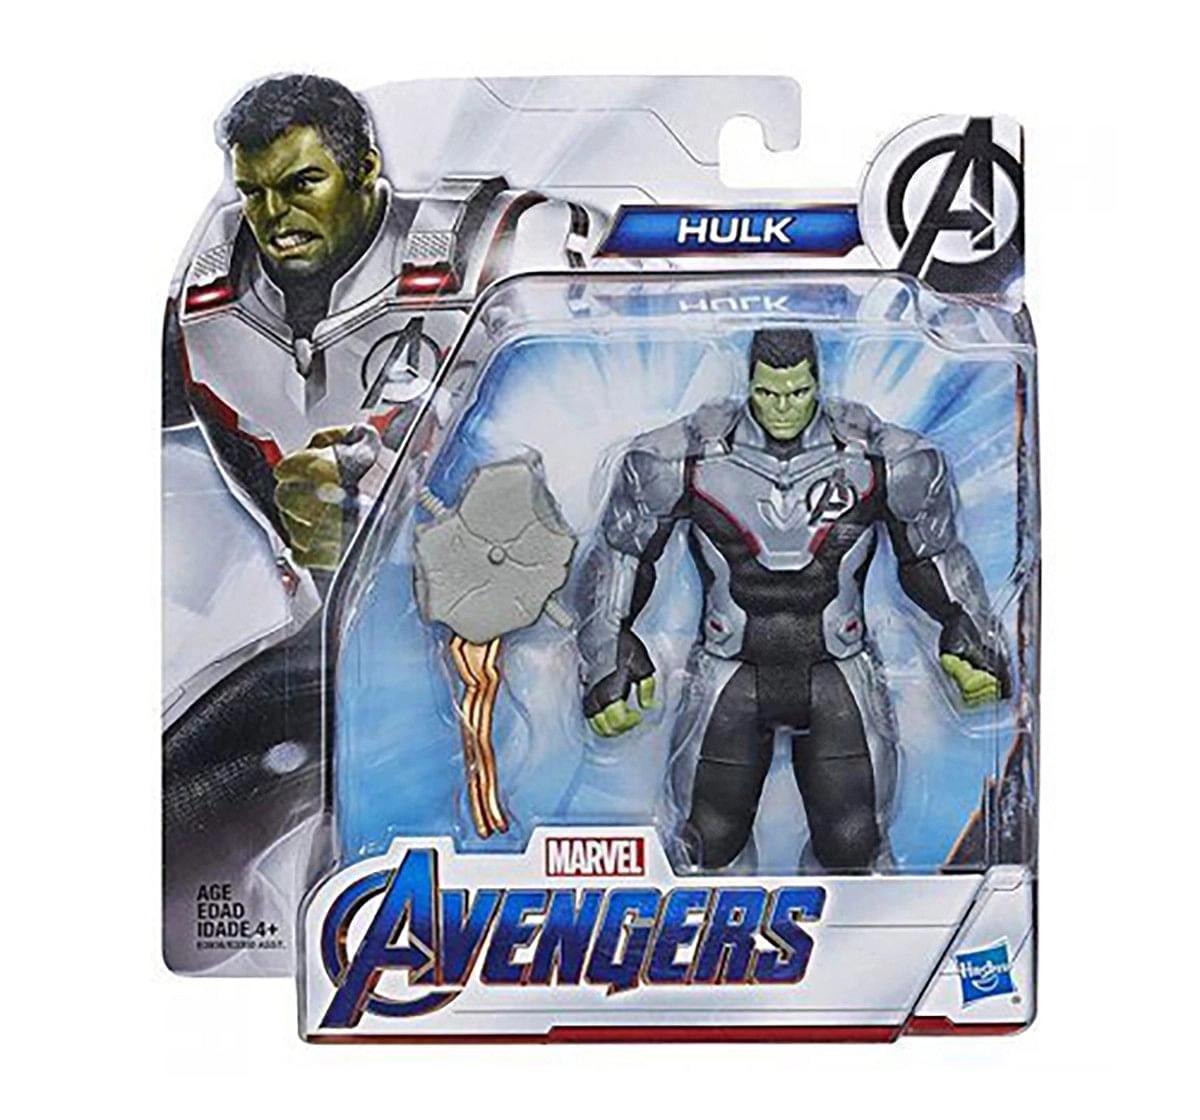 Marvel Avengers: Endgame Deluxe Figures Assorted for Kids age 4Y+ 